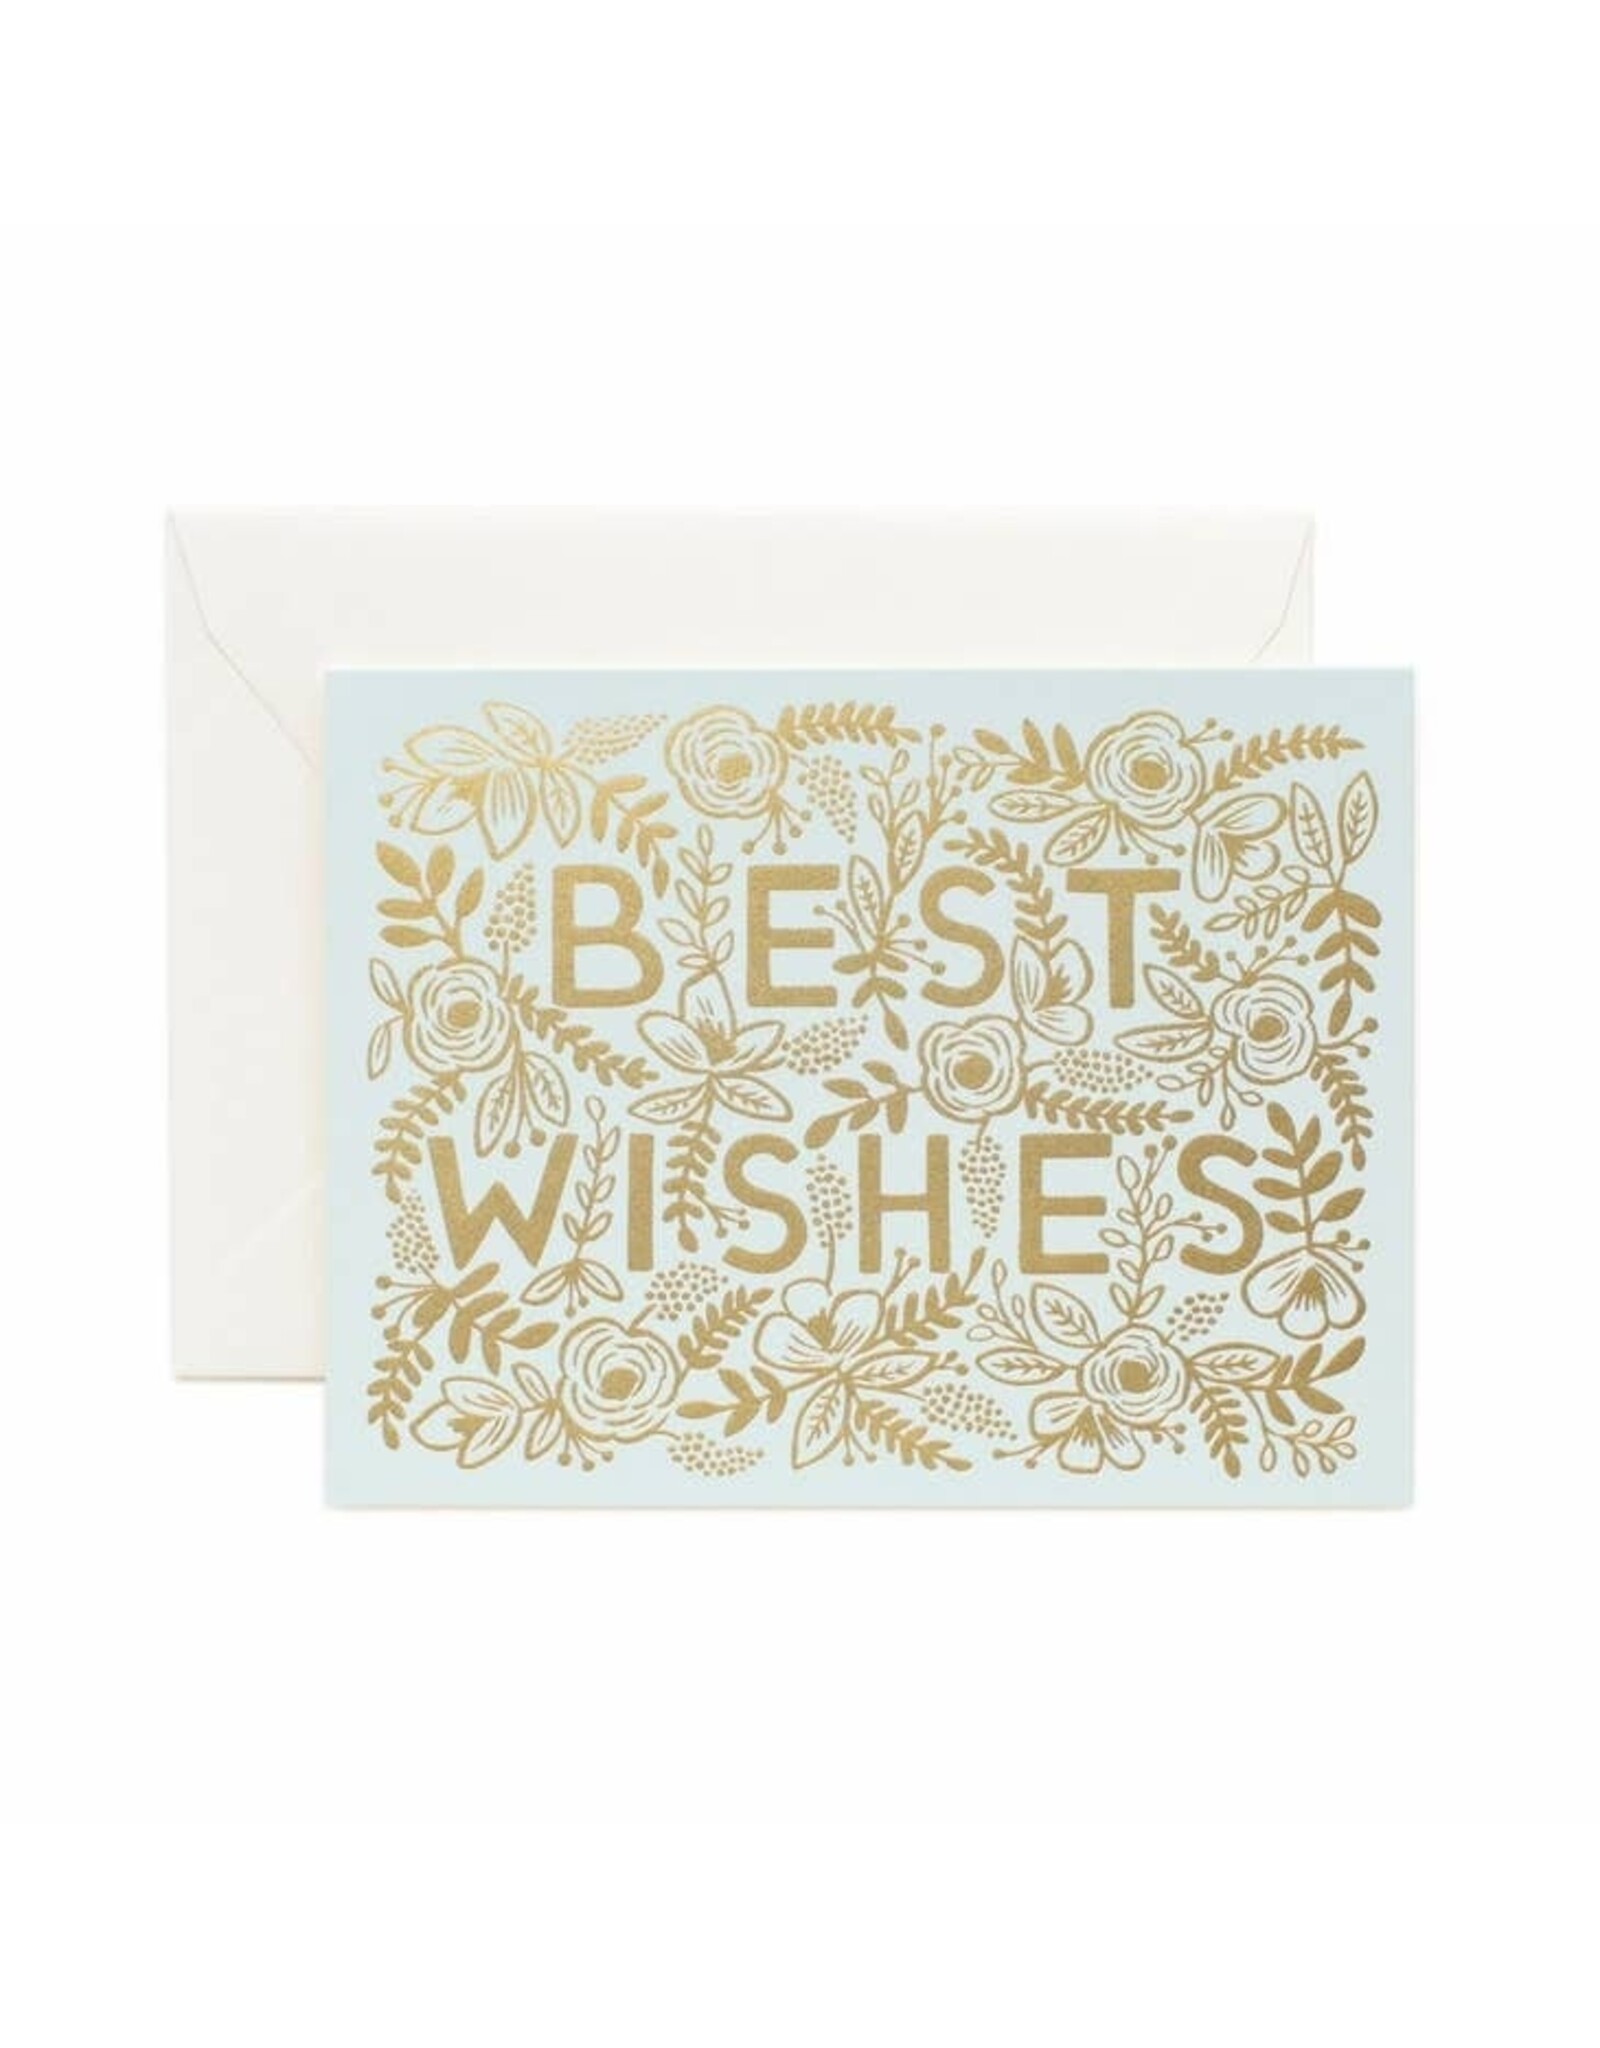 Rifle Paper Co. Golden Best Wishes A2 Greeting Notecard